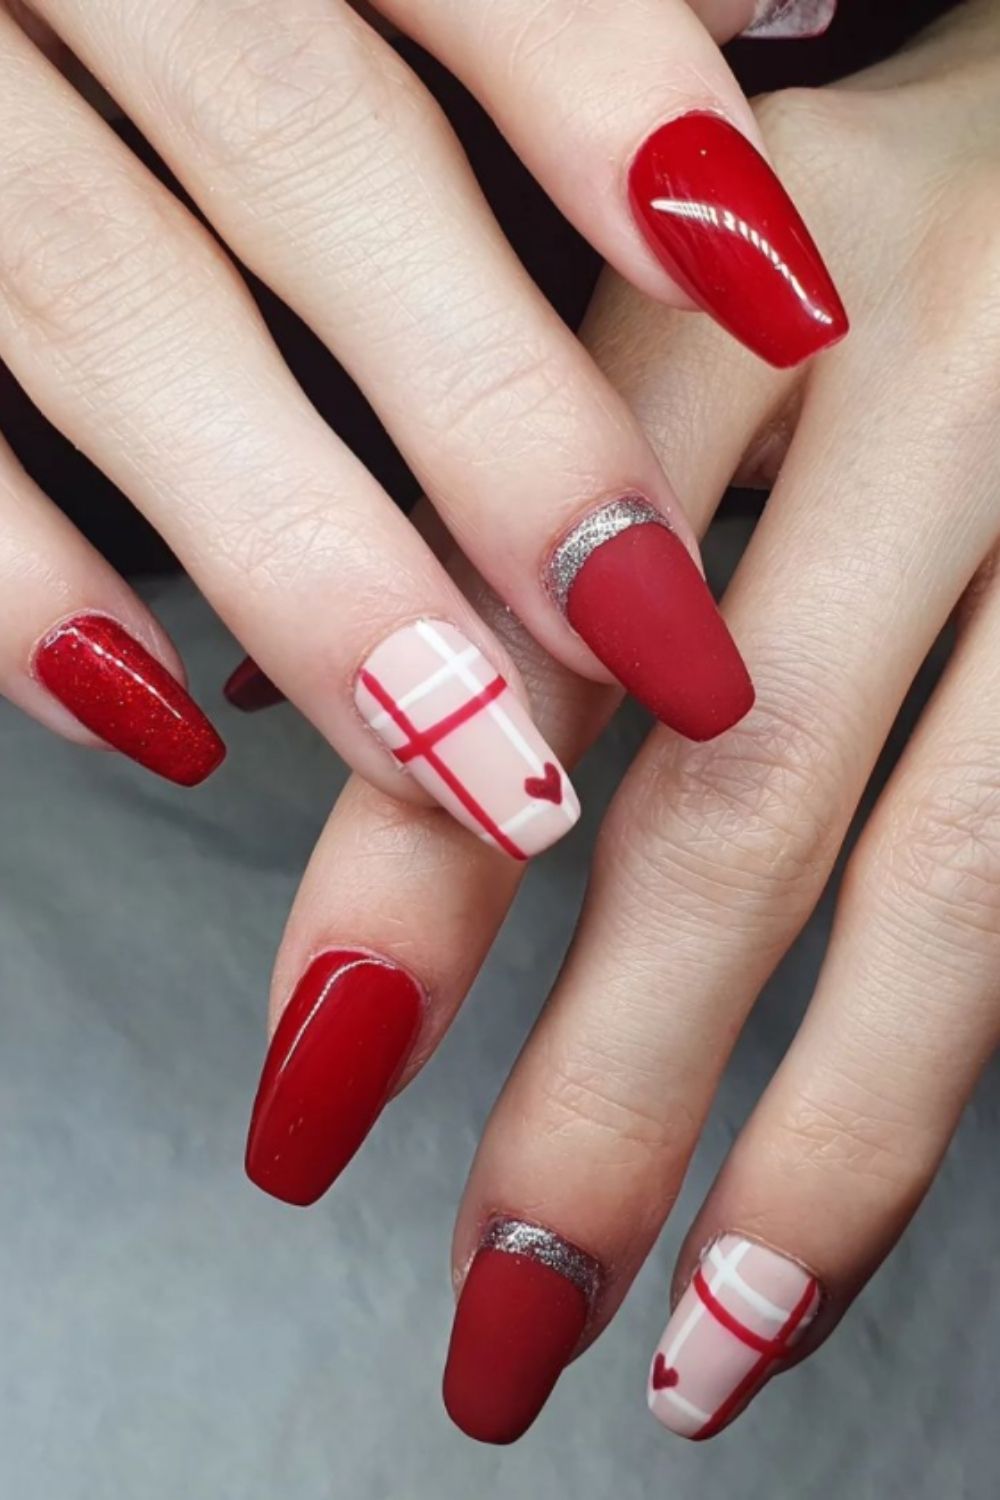 Silver and red nails designs